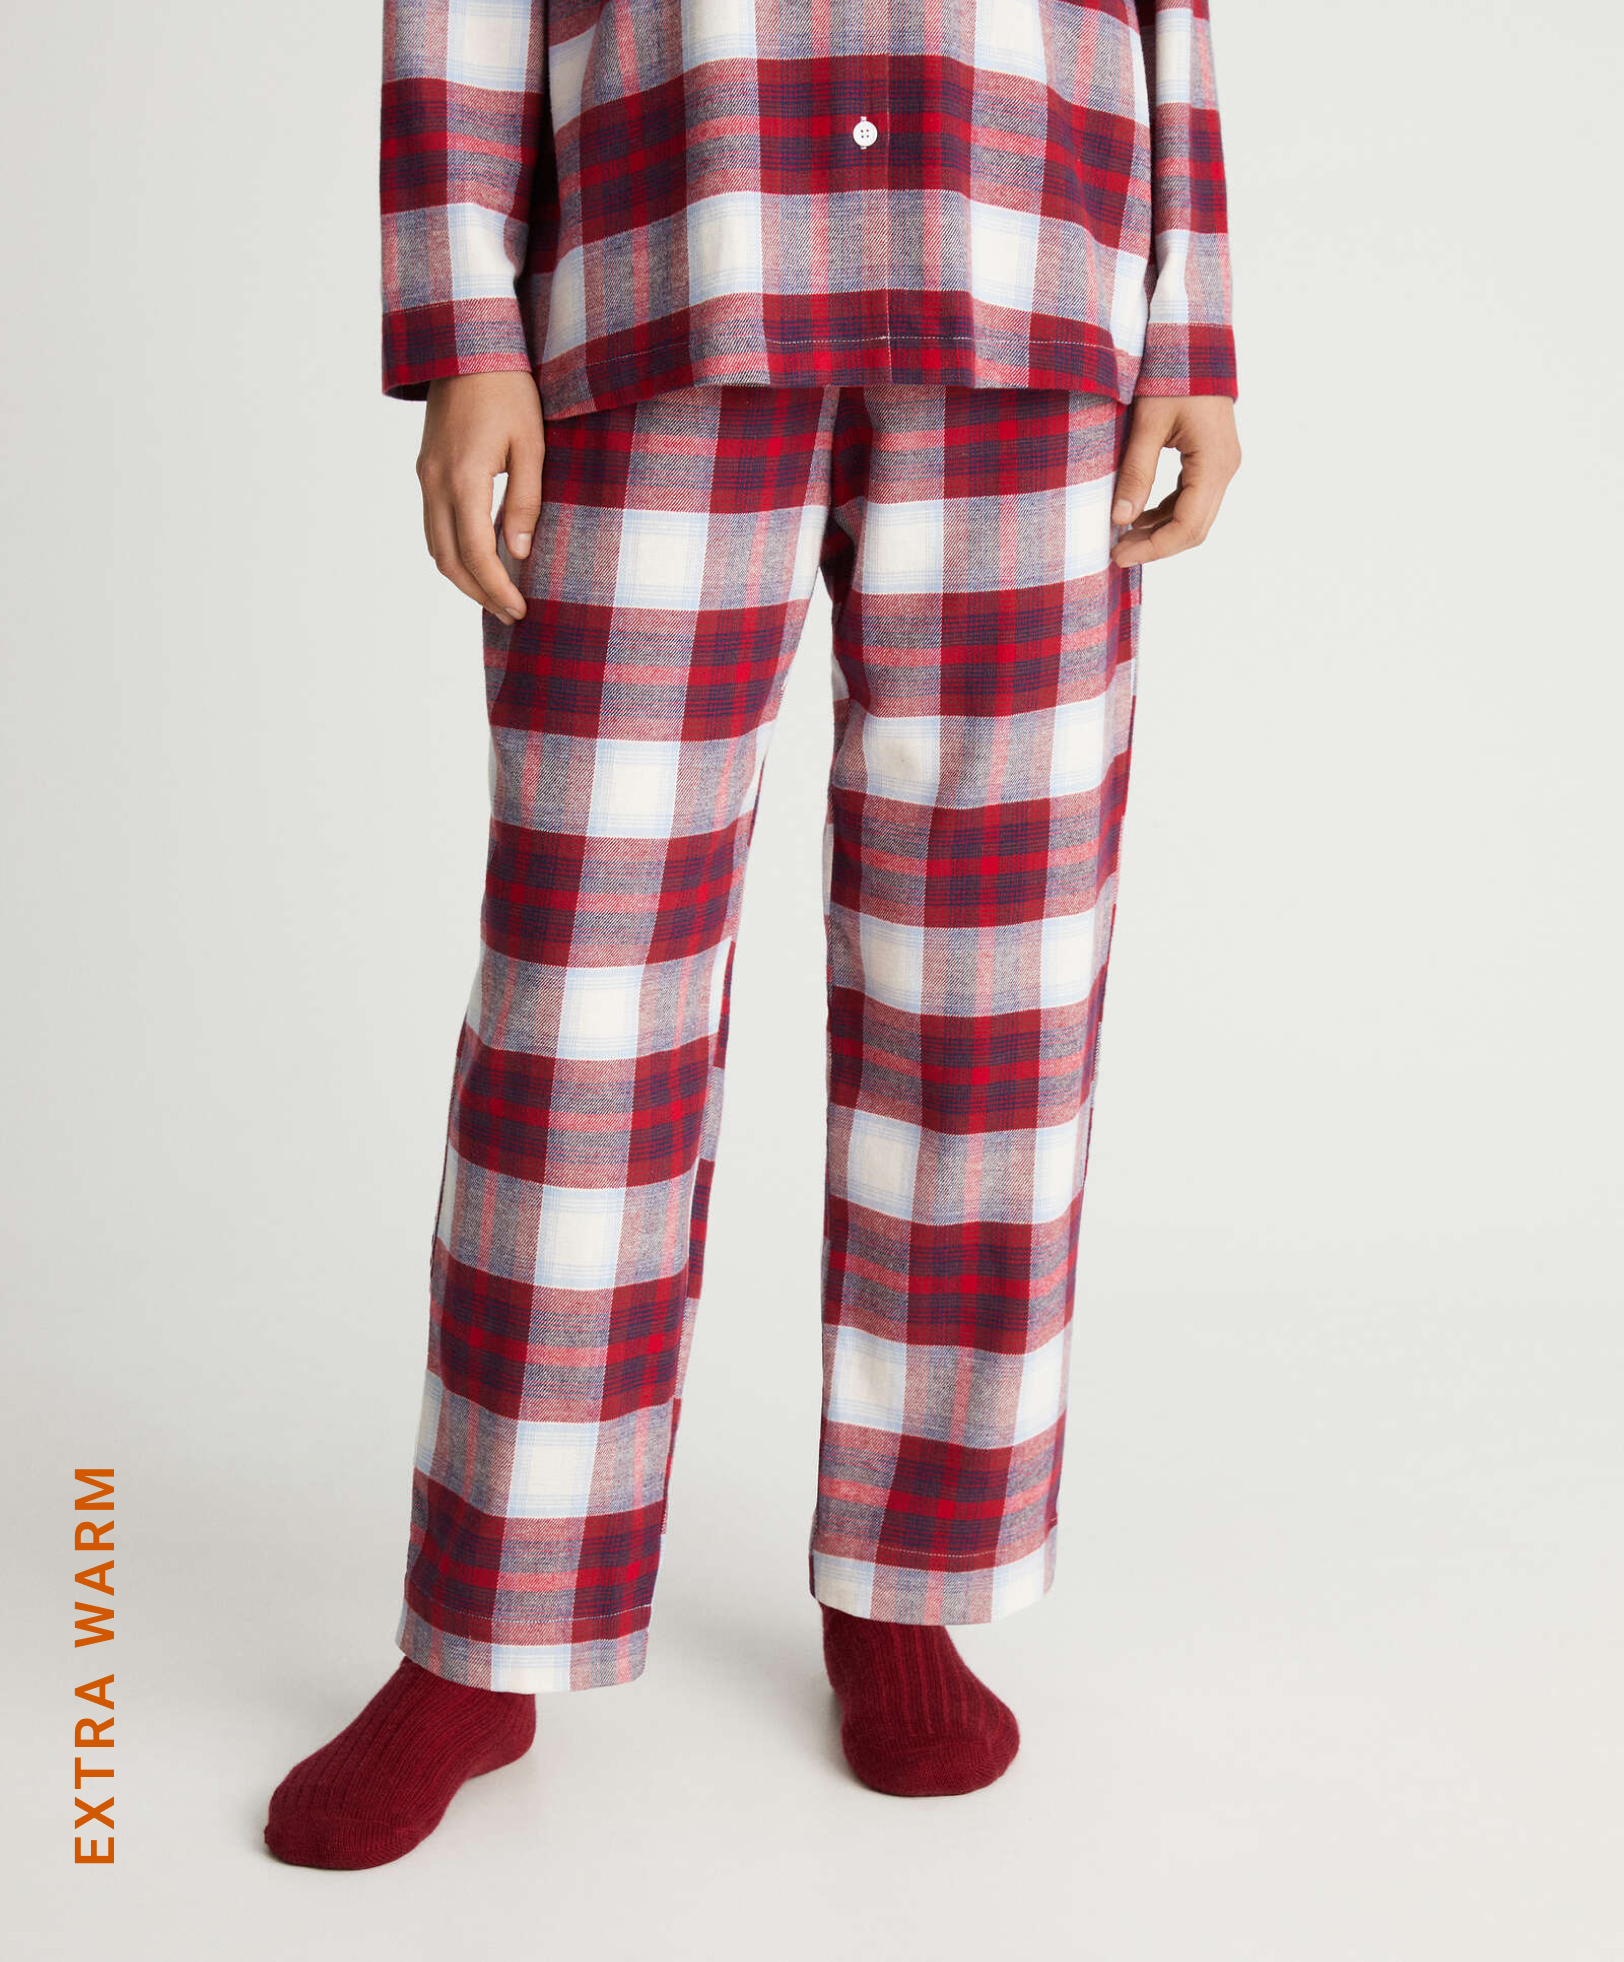 Extra warm check cotton trousers